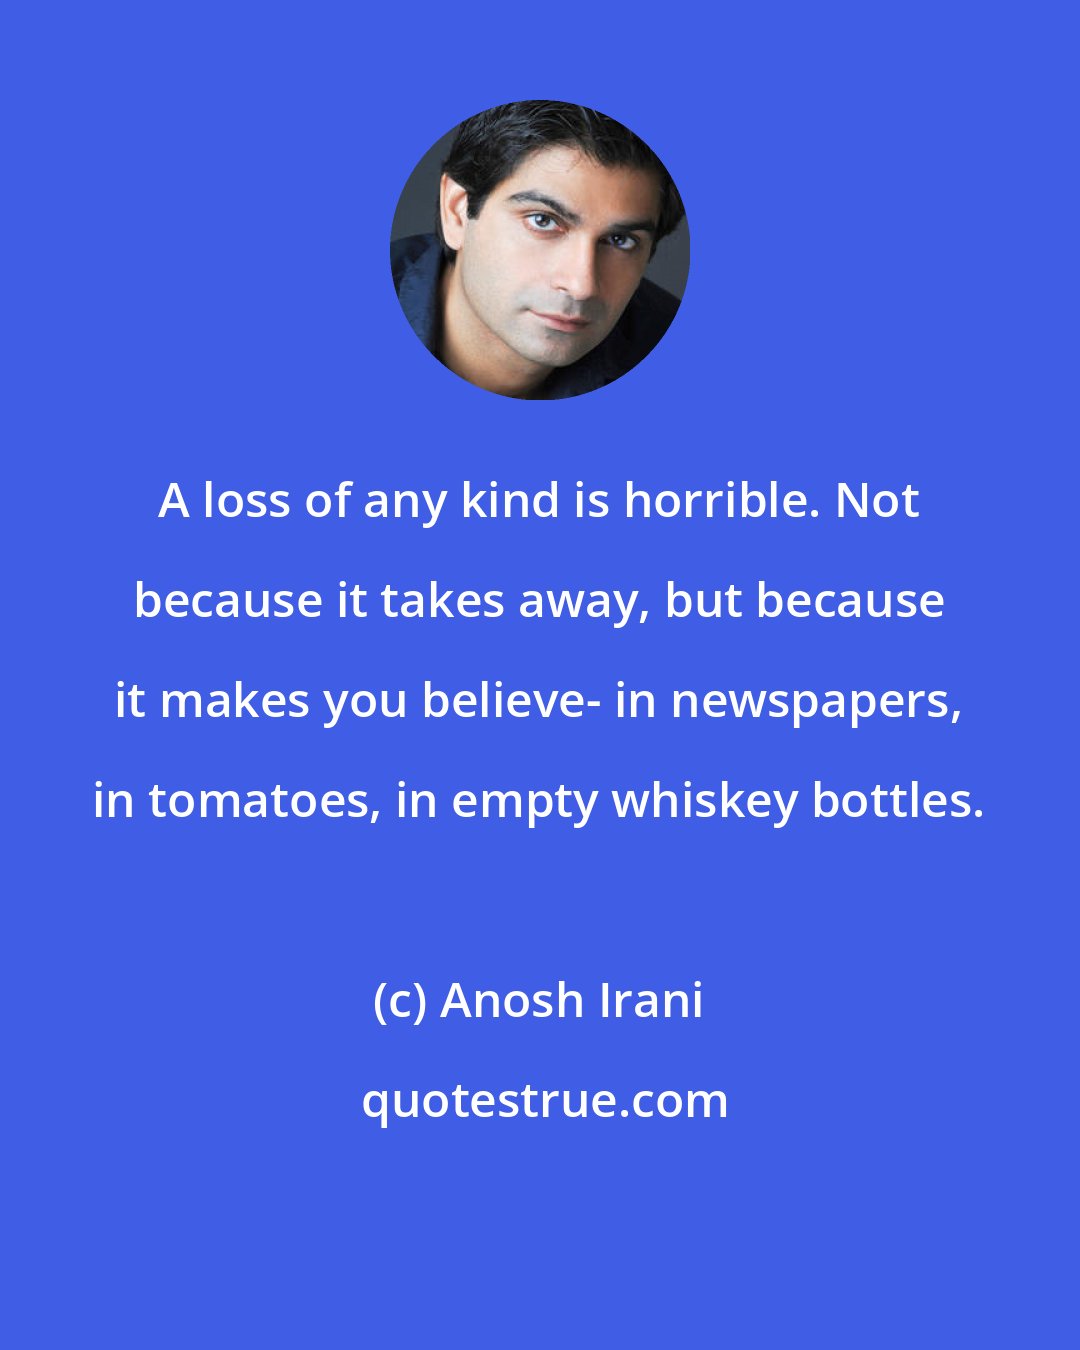 Anosh Irani: A loss of any kind is horrible. Not because it takes away, but because it makes you believe- in newspapers, in tomatoes, in empty whiskey bottles.